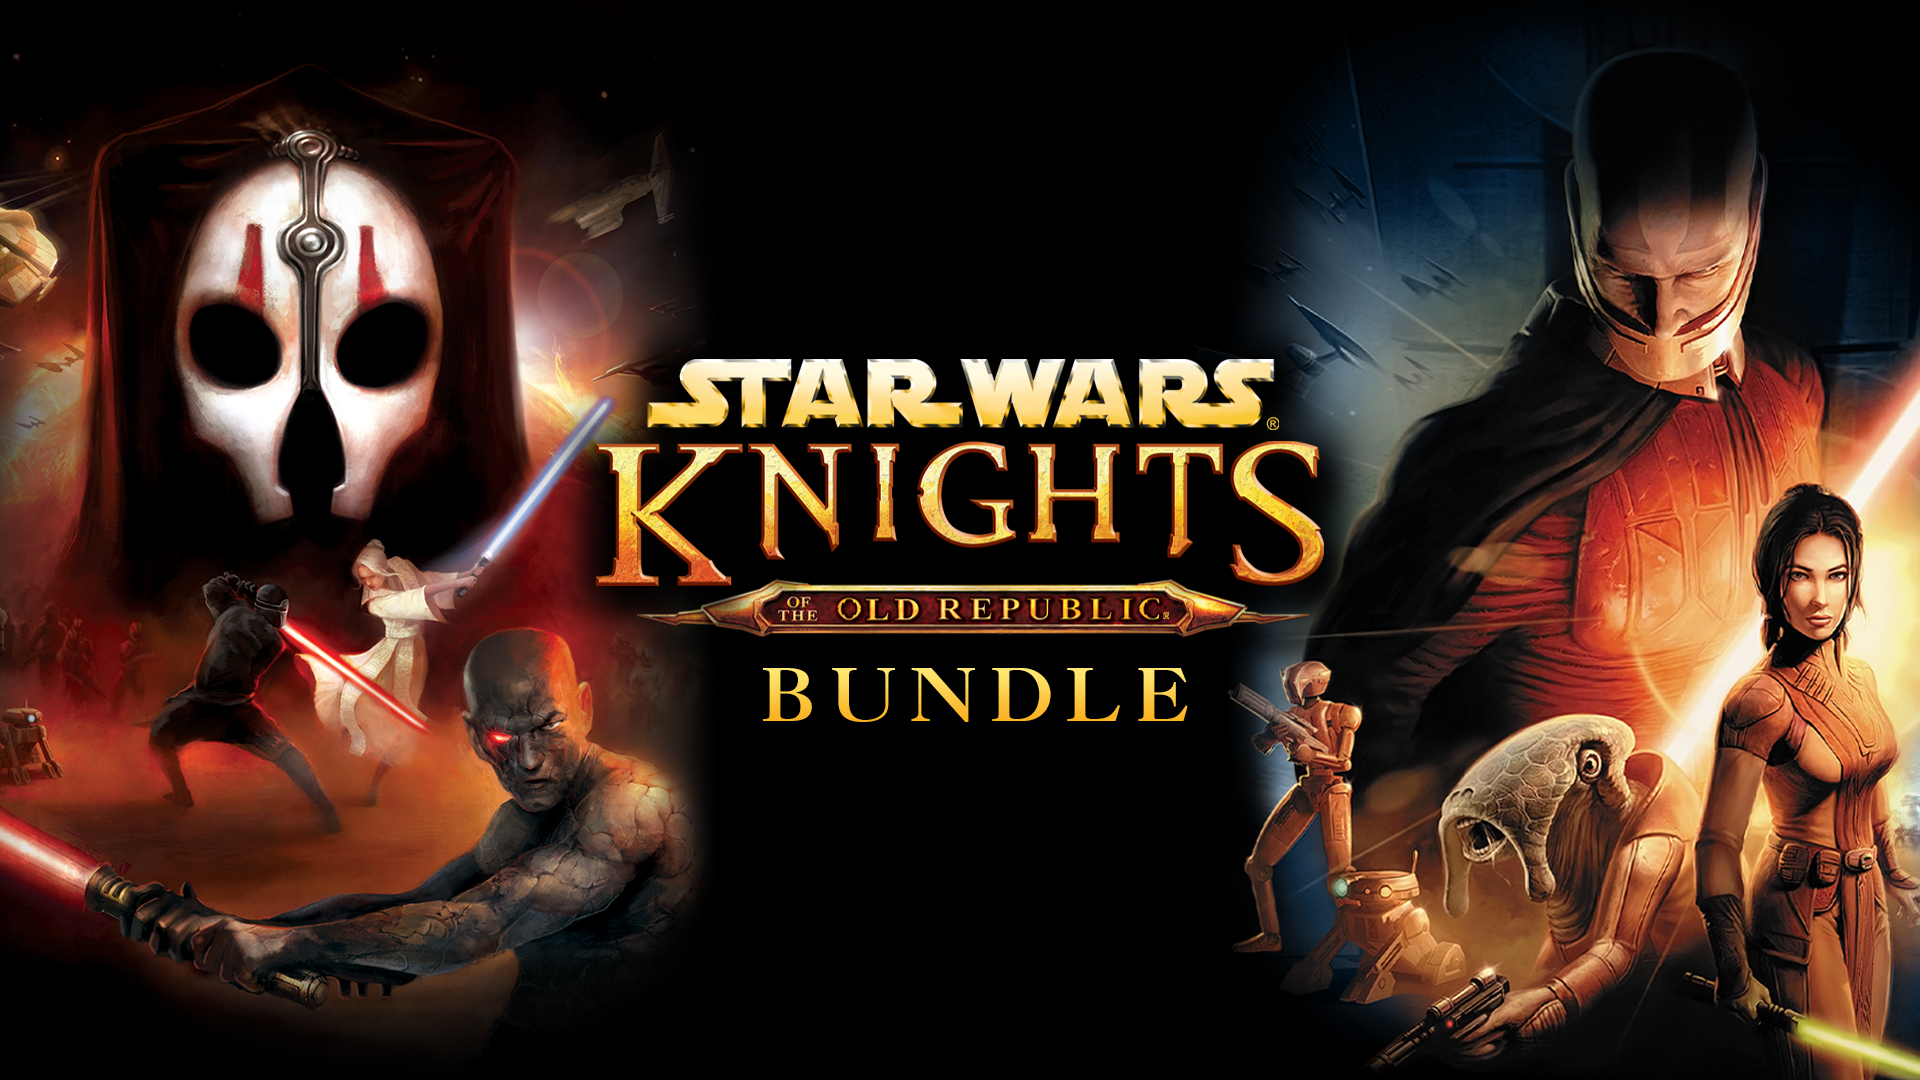 Star wars knight of the old republic 2 русификатор steam фото 24